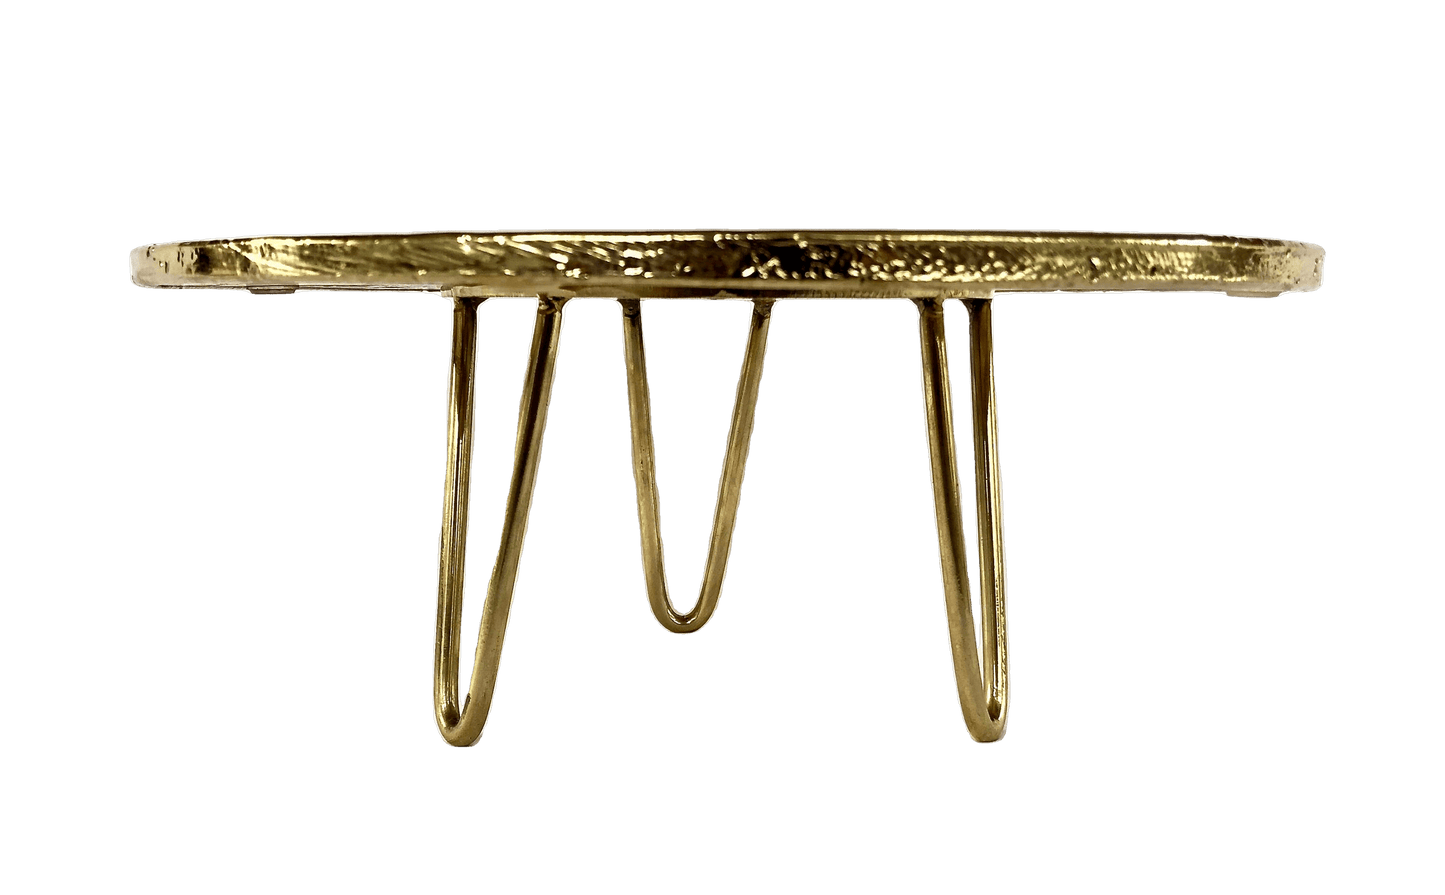 Golden Brown Agate Cake Stand with Brass Legs - MAIA HOMES